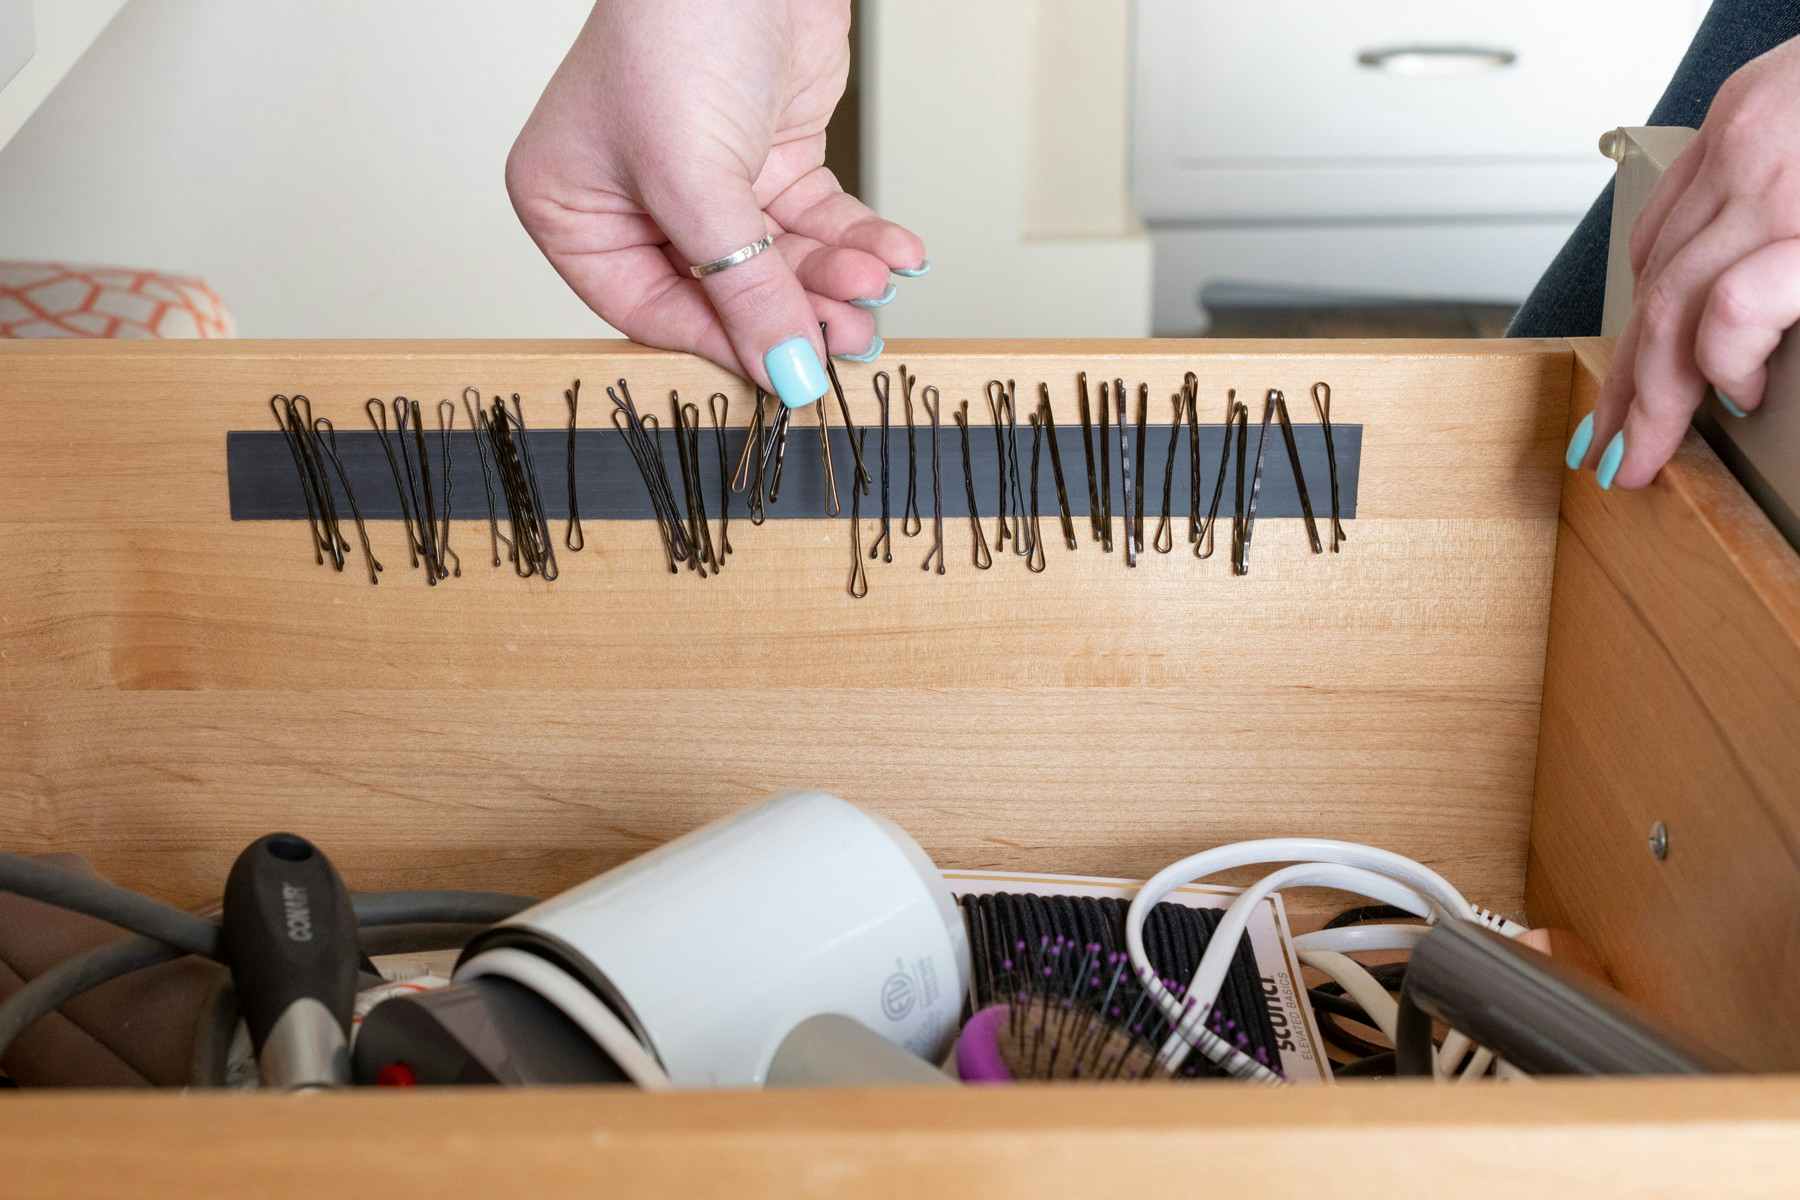 someone sticking bobby pins on magnetic strip